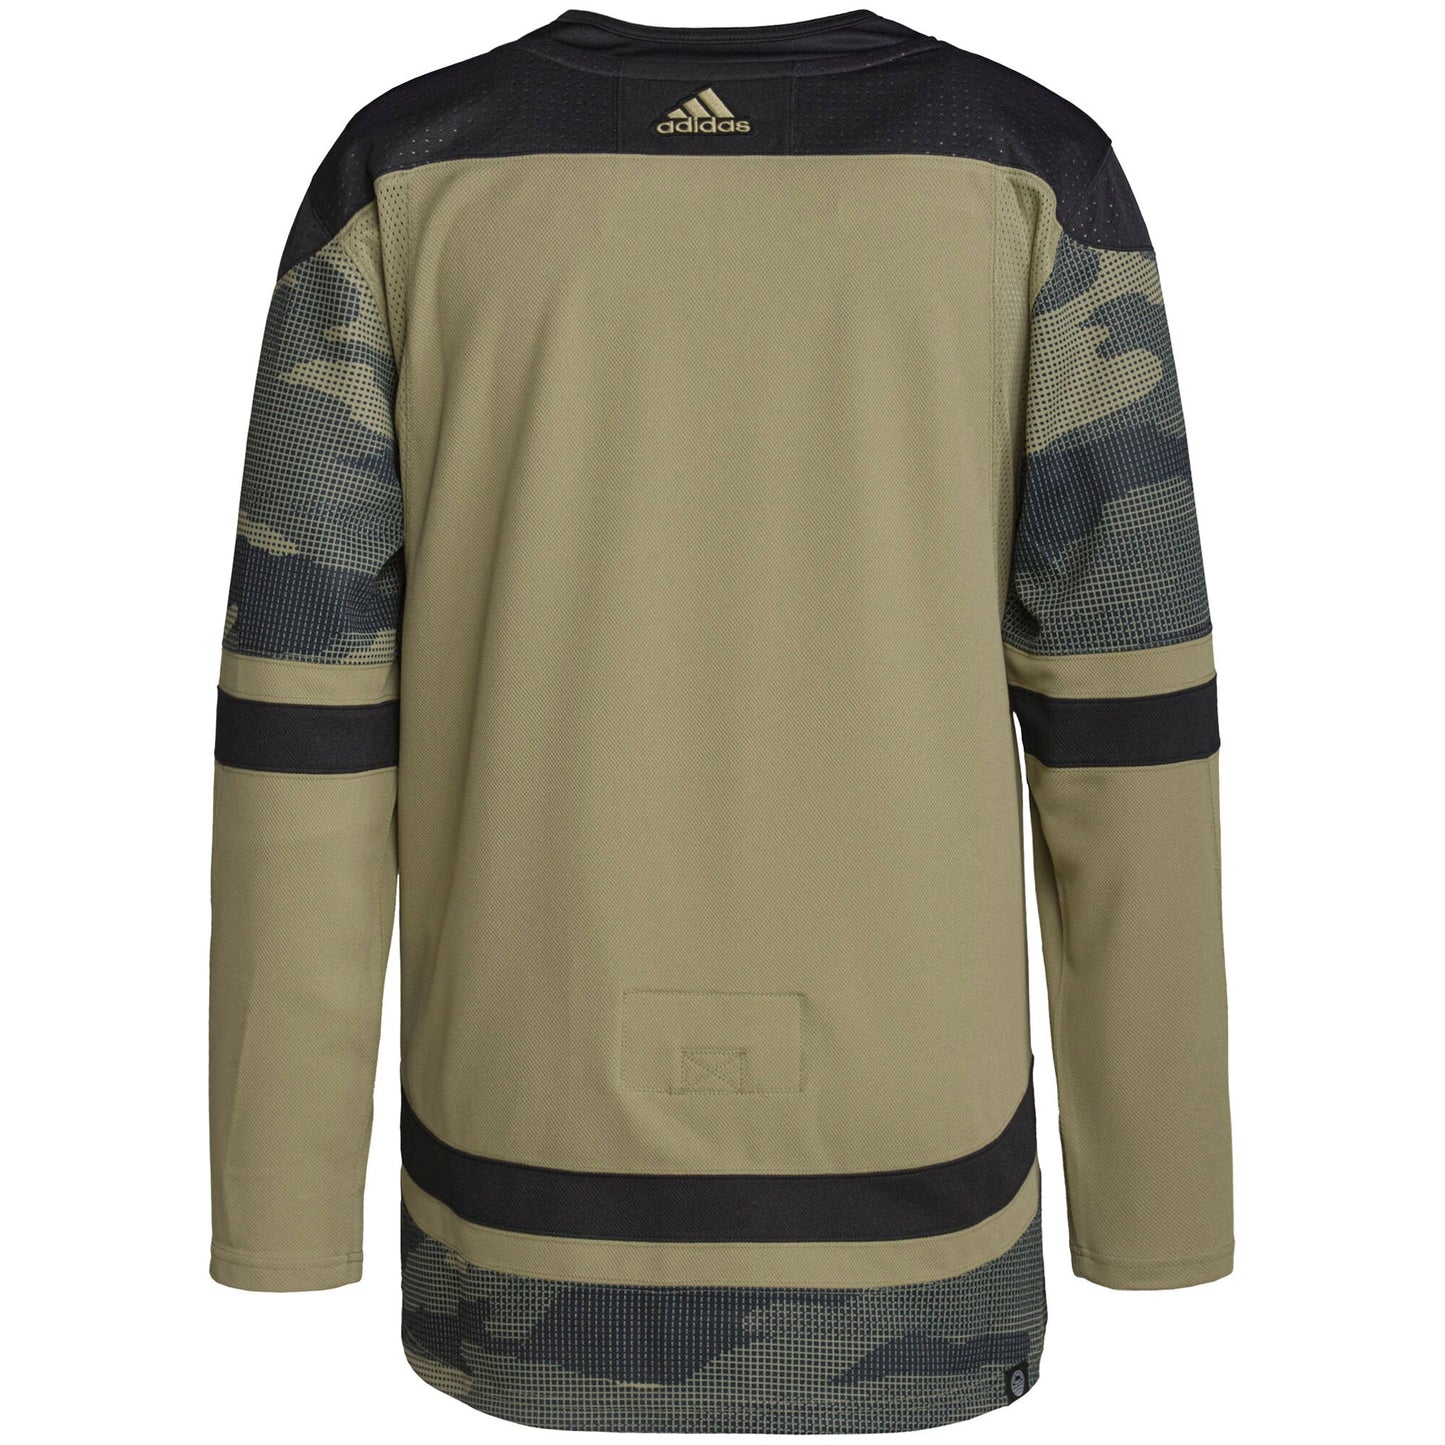 New Jersey Devils adidas Military Appreciation Team Authentic Practice Jersey - Camo